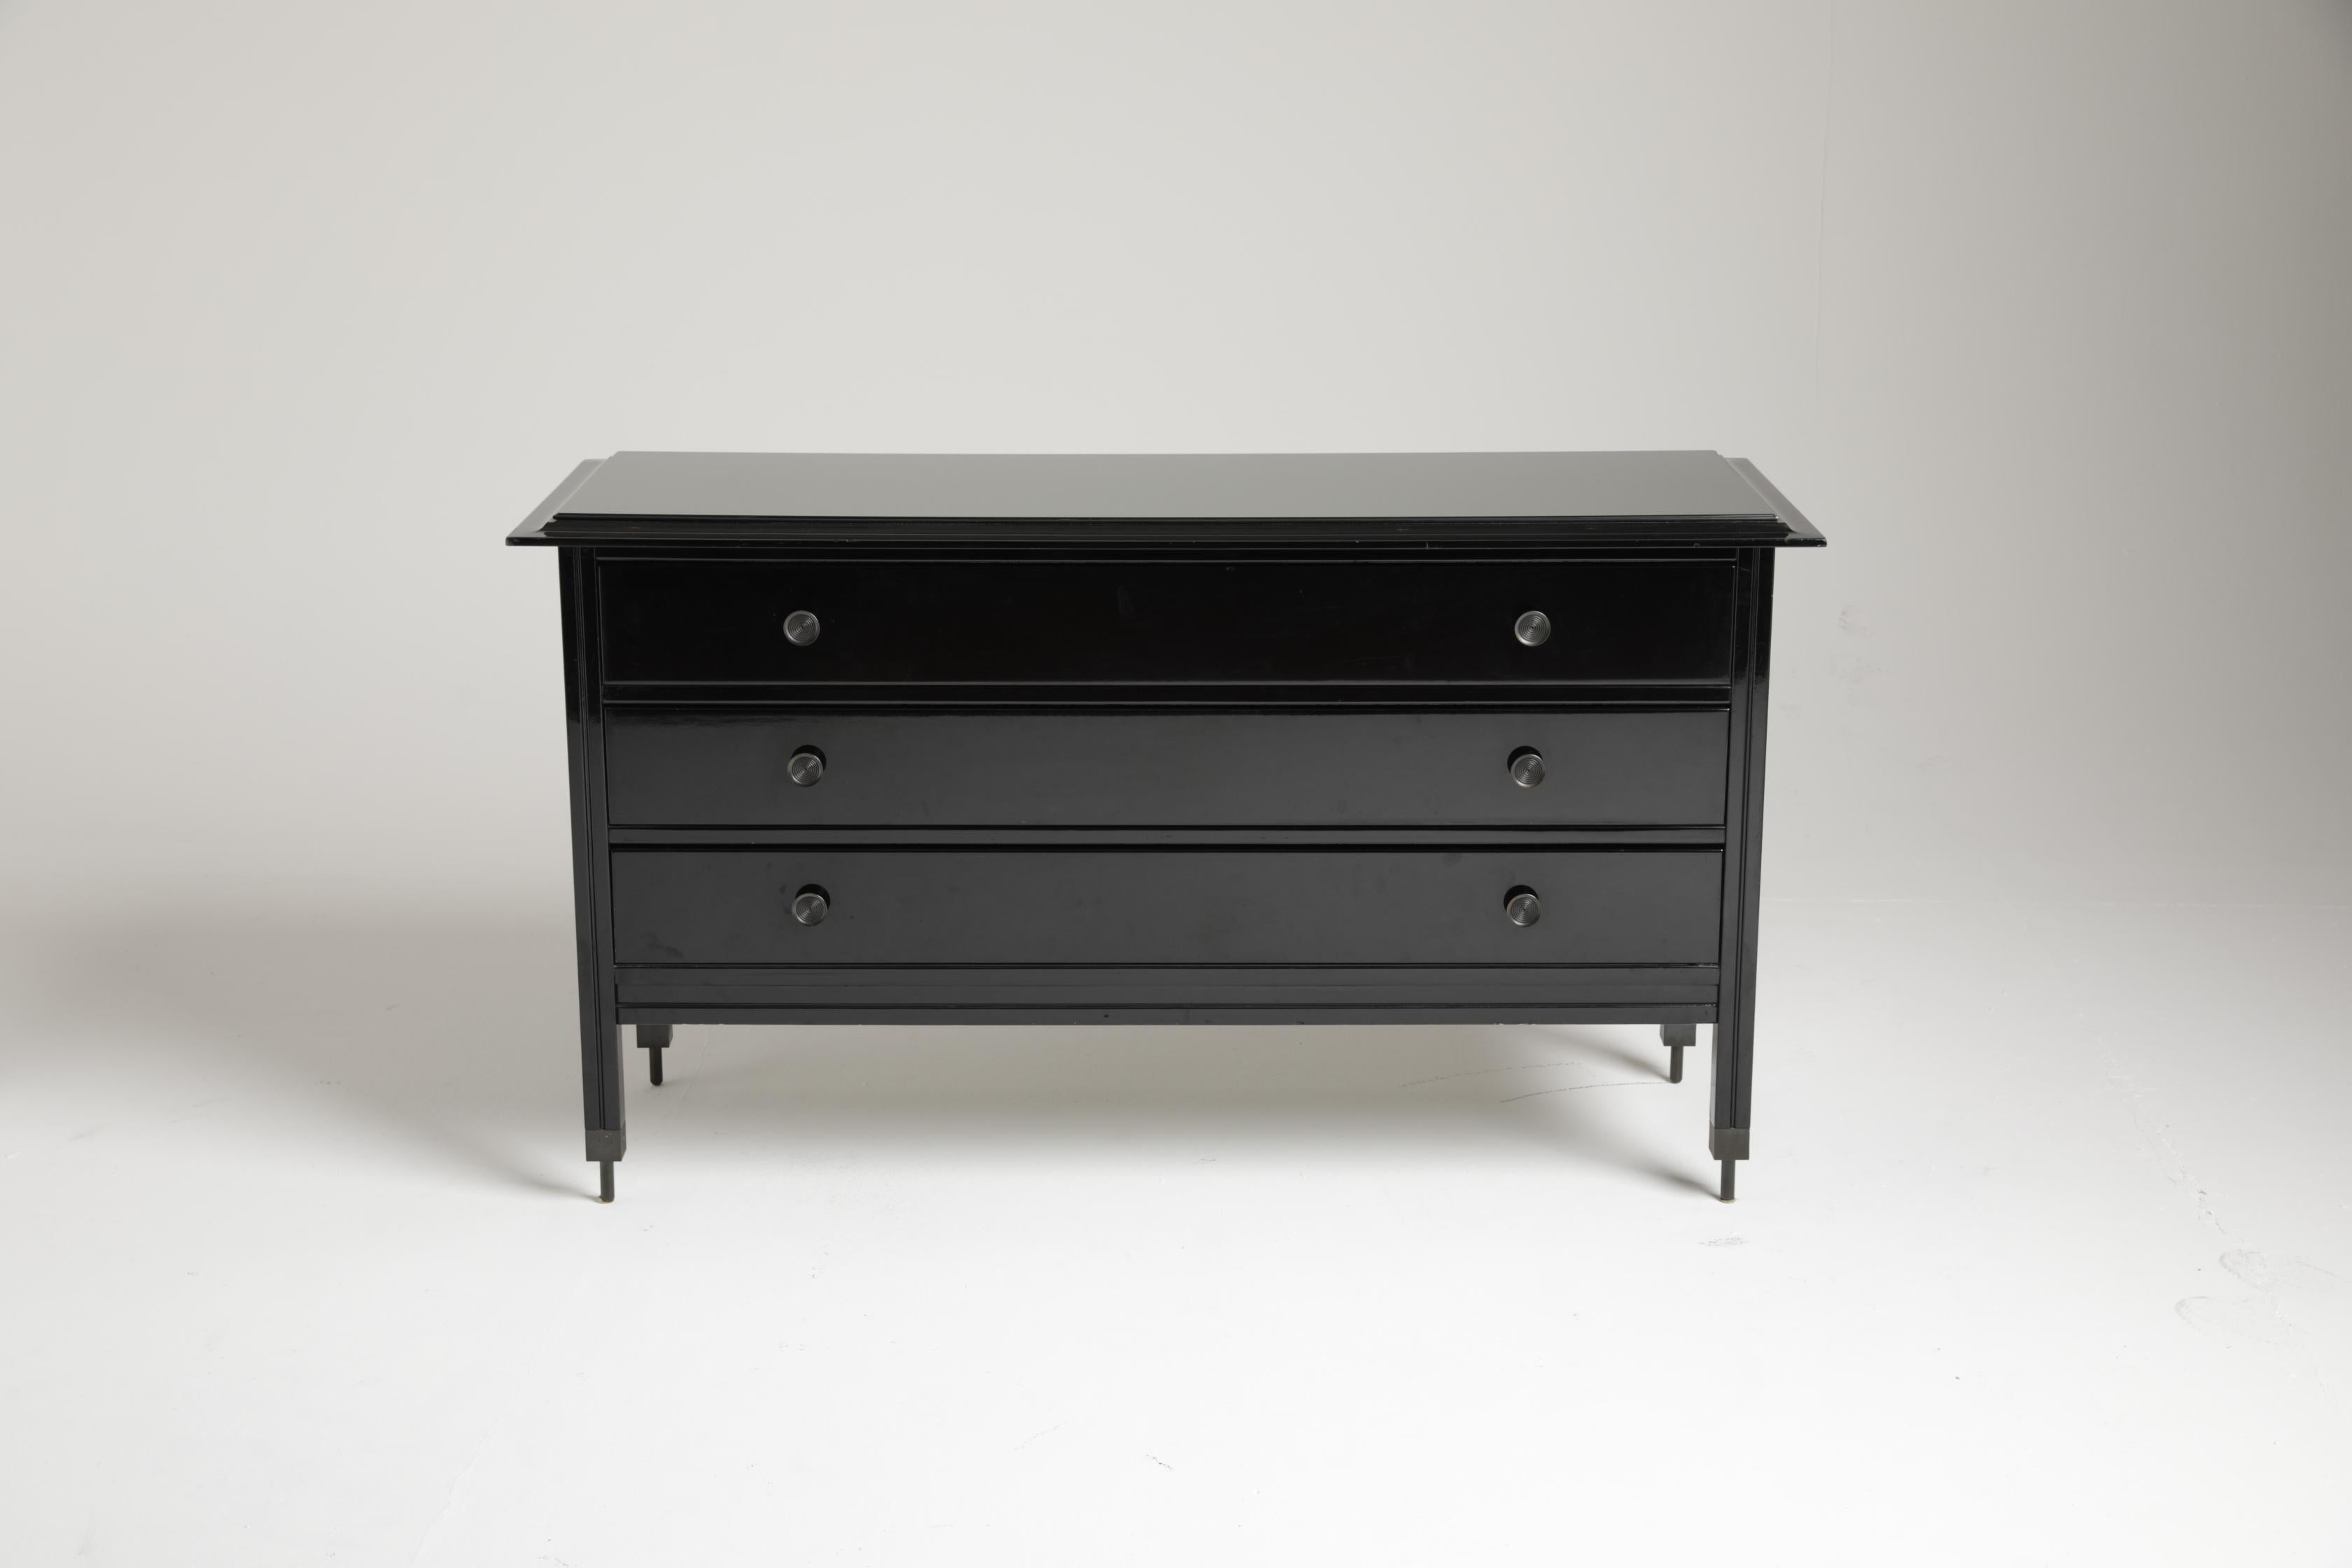 Carlo de Carli Chest of Drawers D154 in Lacquered wood, Sormani, Italy 1963 For Sale 5